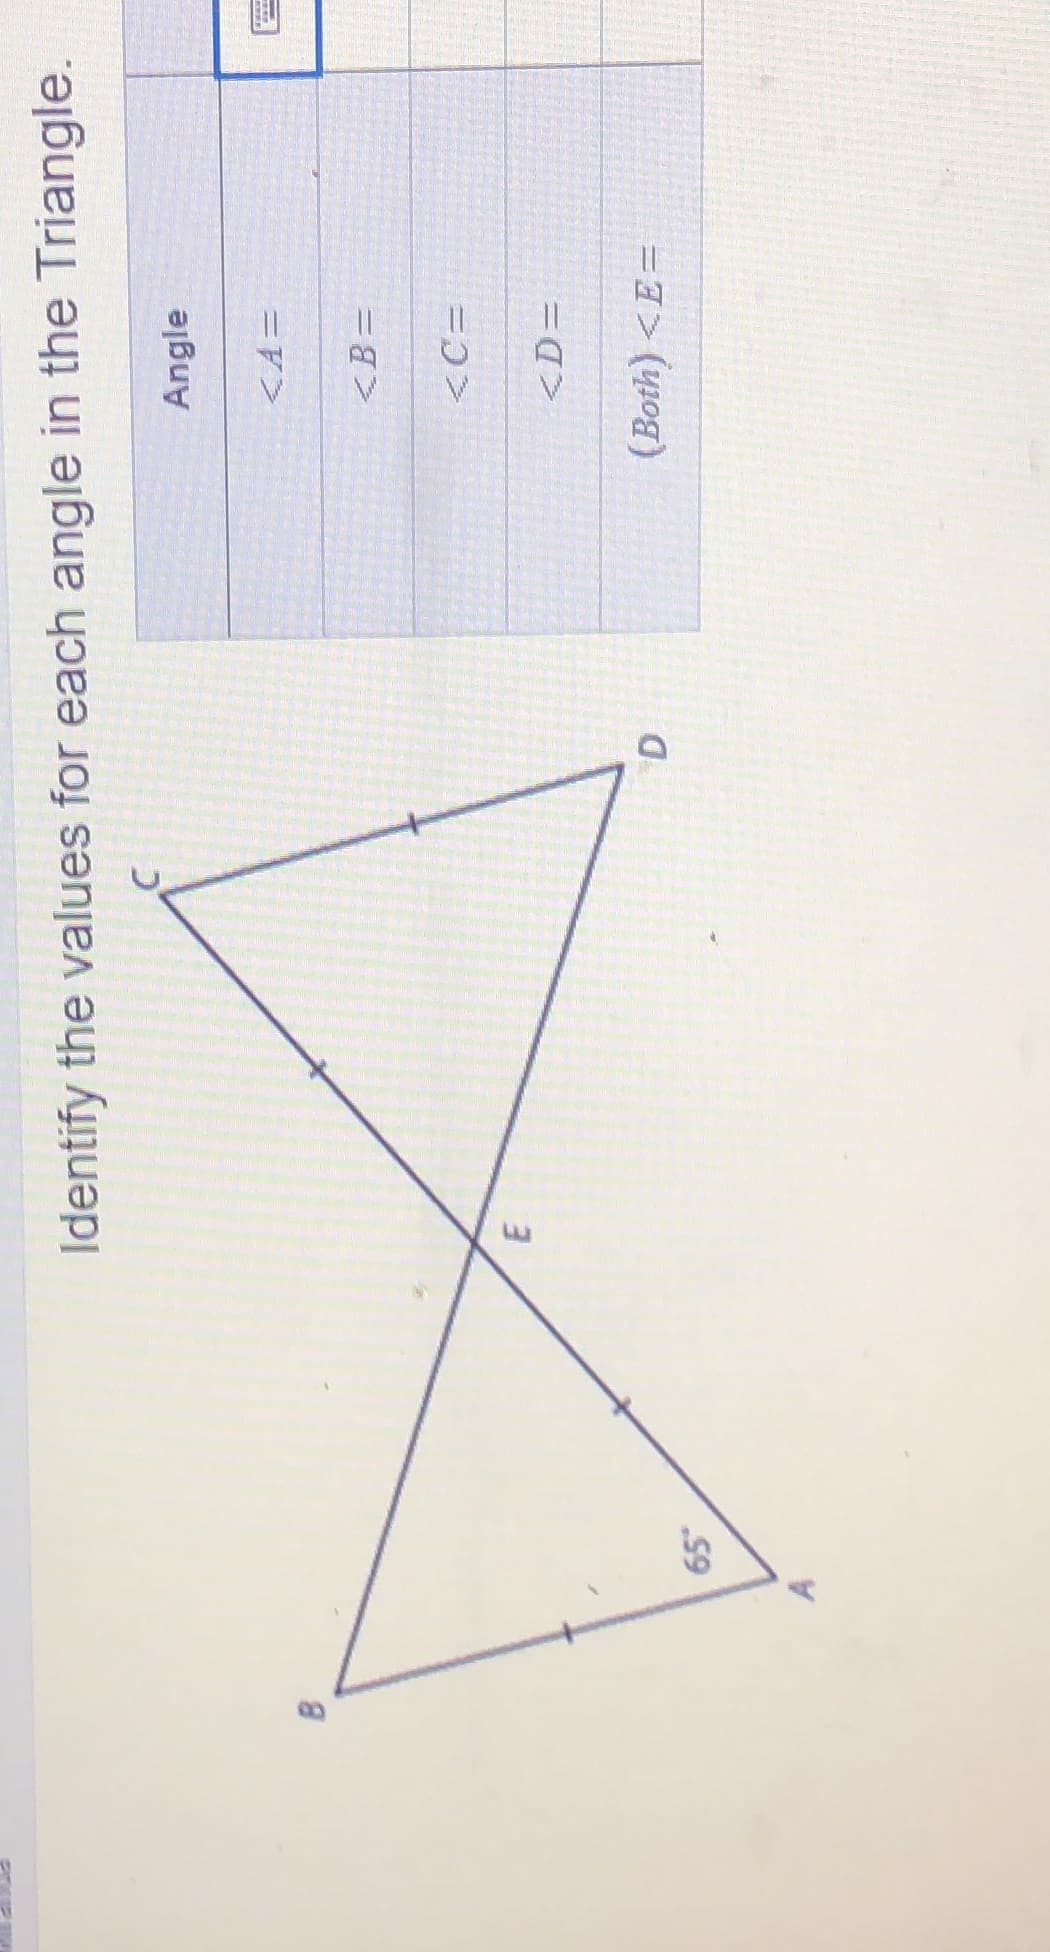 D.
Identify the values for each angle in the Triangle.
Angle
<B =
<C =
(Both) <E=
99
